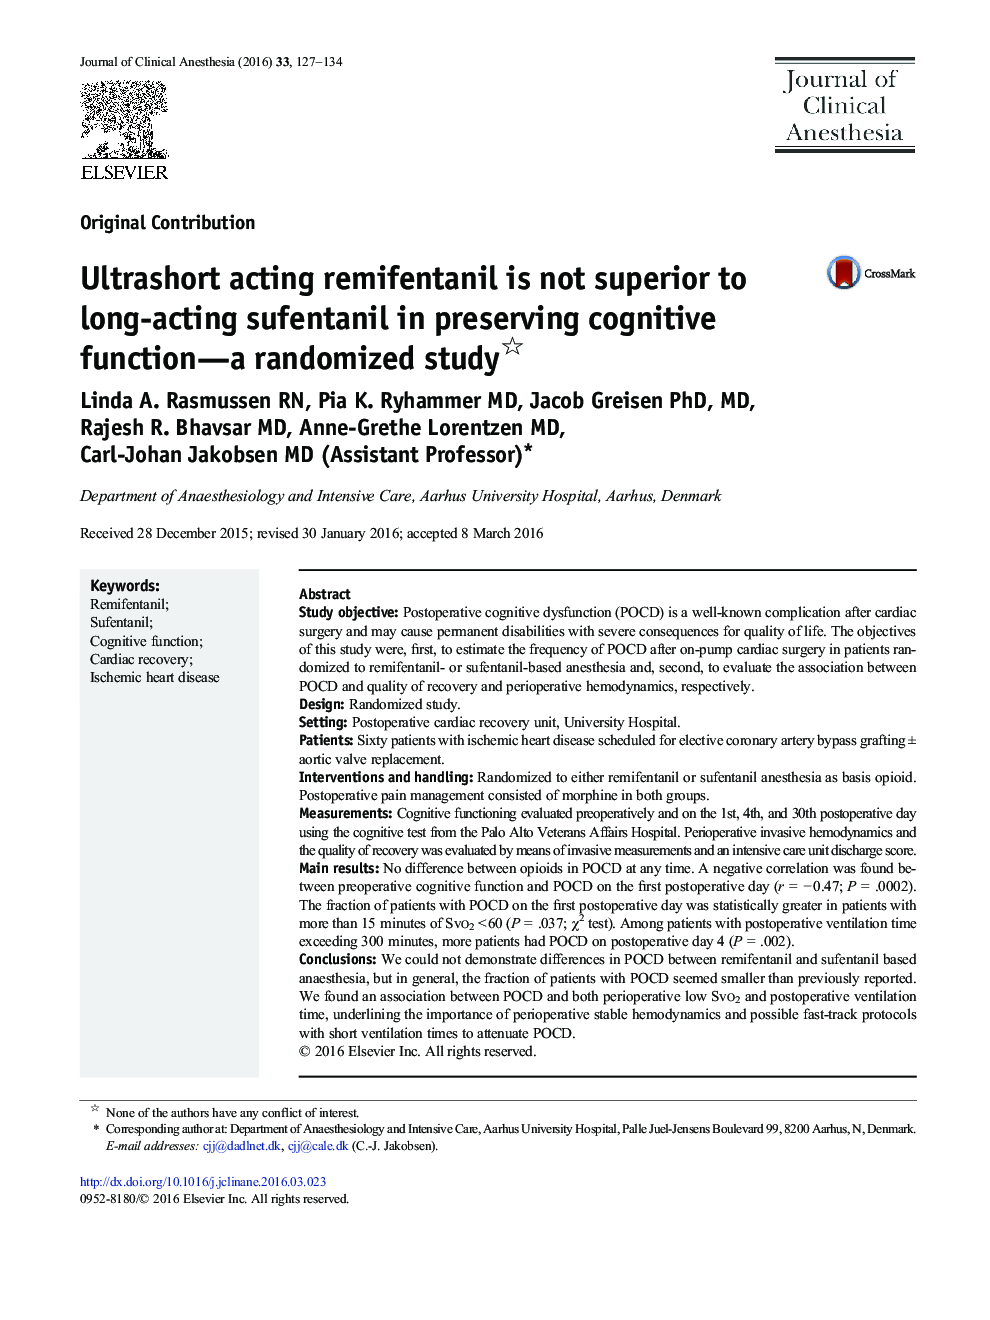 Ultrashort acting remifentanil is not superior to long-acting sufentanil in preserving cognitive function—a randomized study 